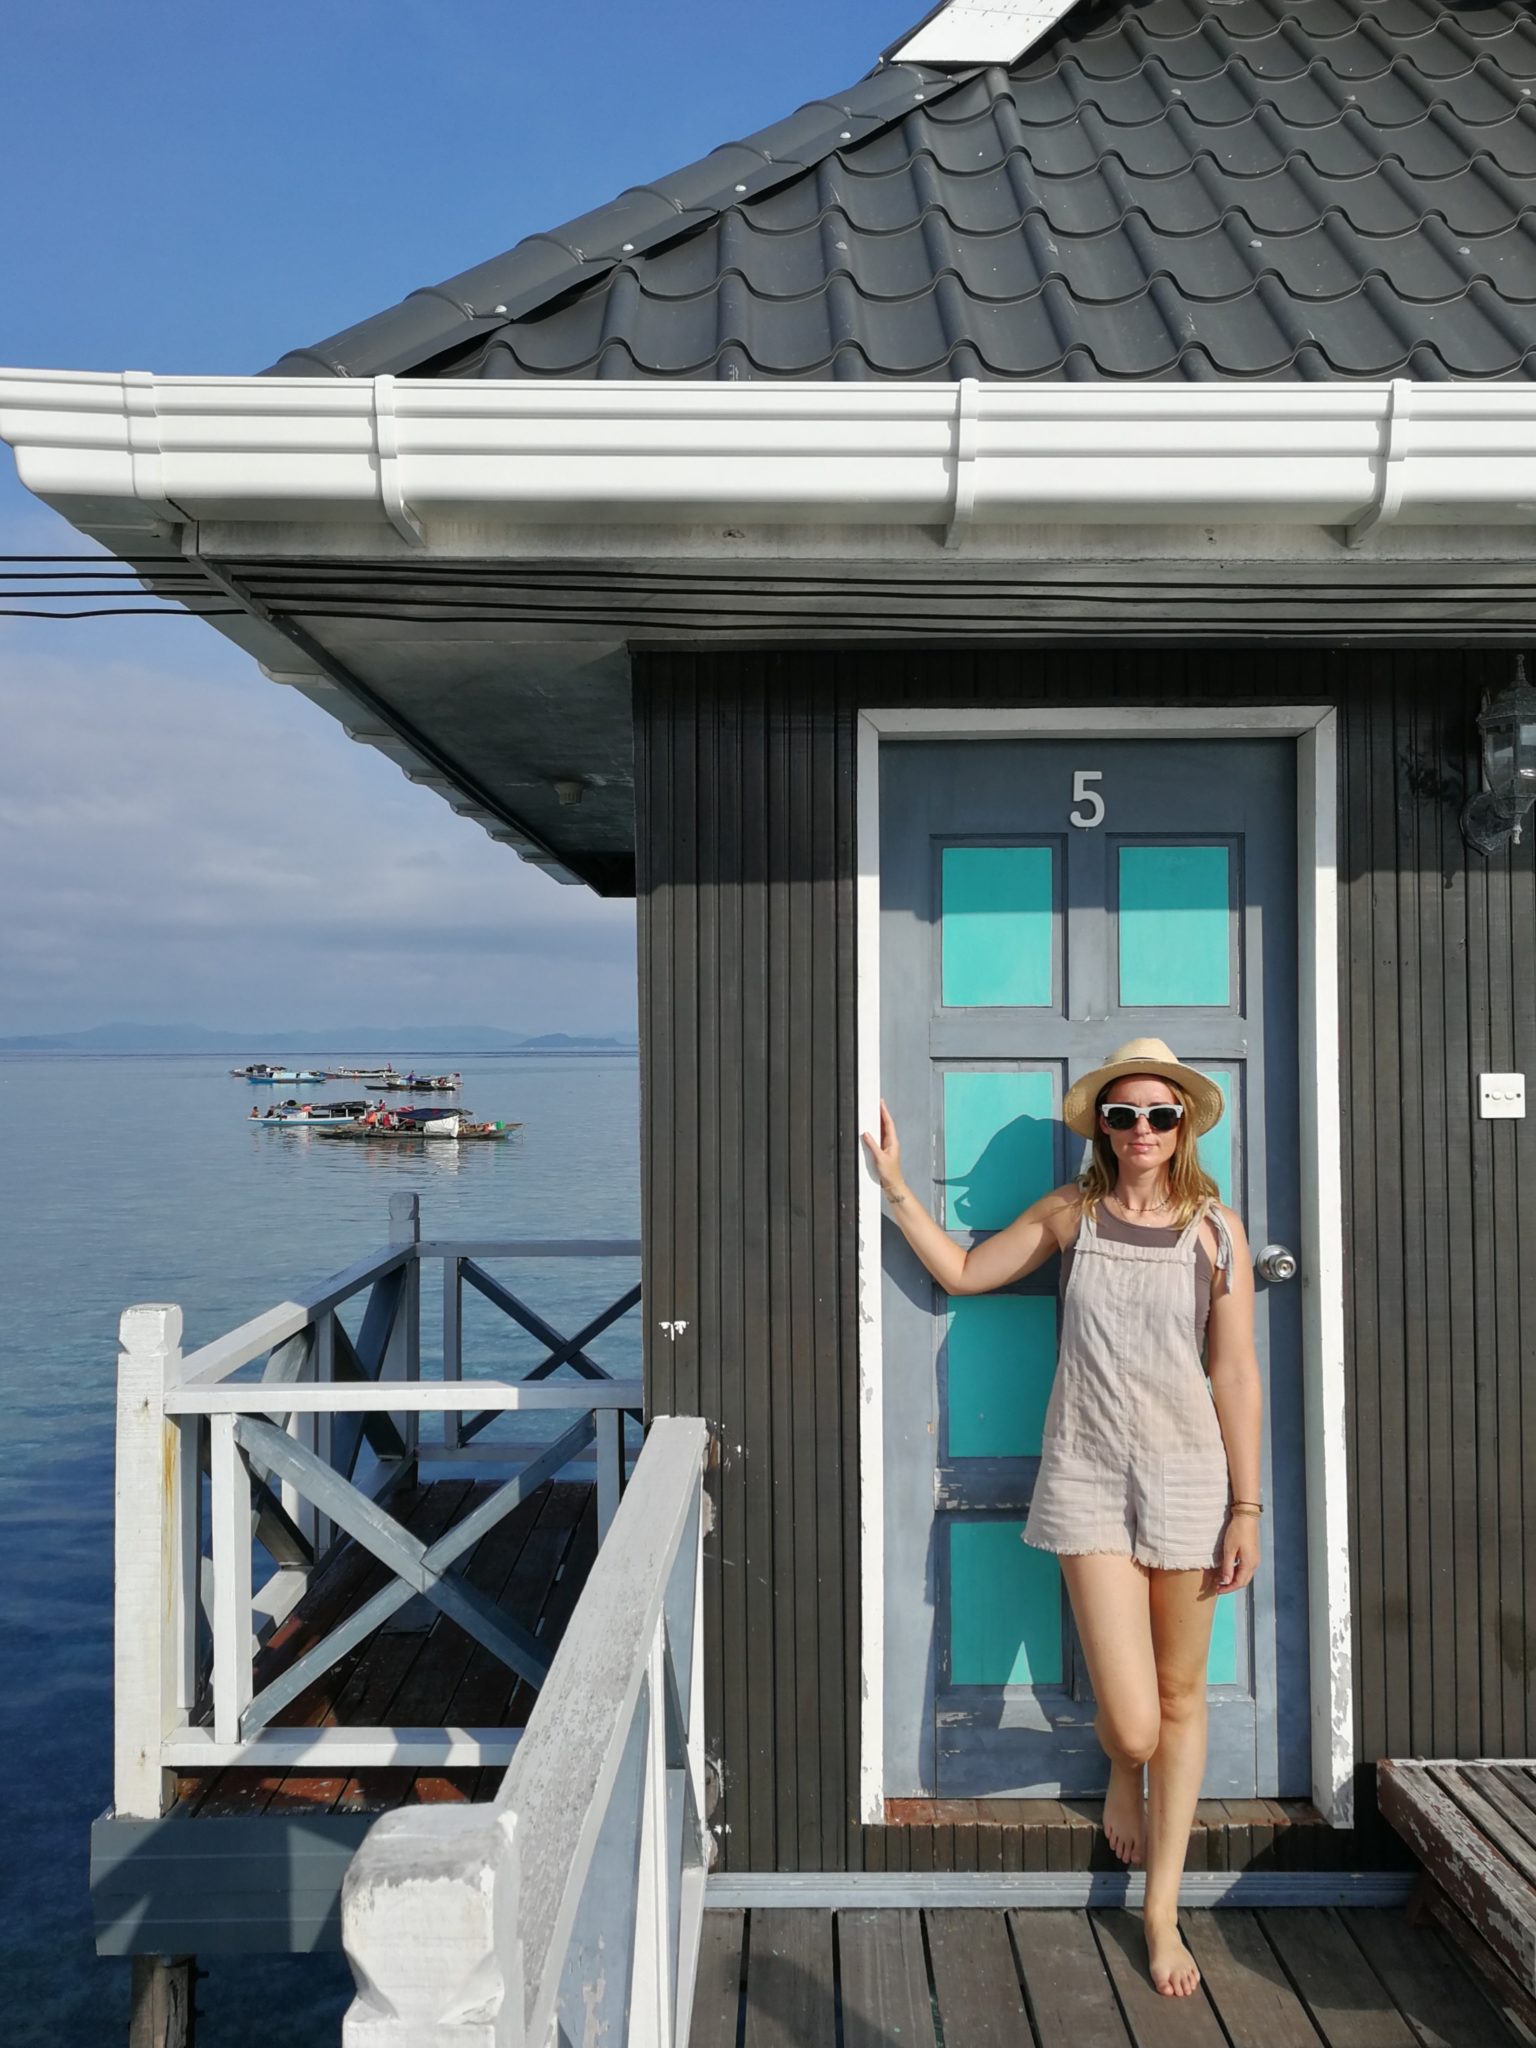 Sarah standing in front of a beach bungalow with a turquoise door